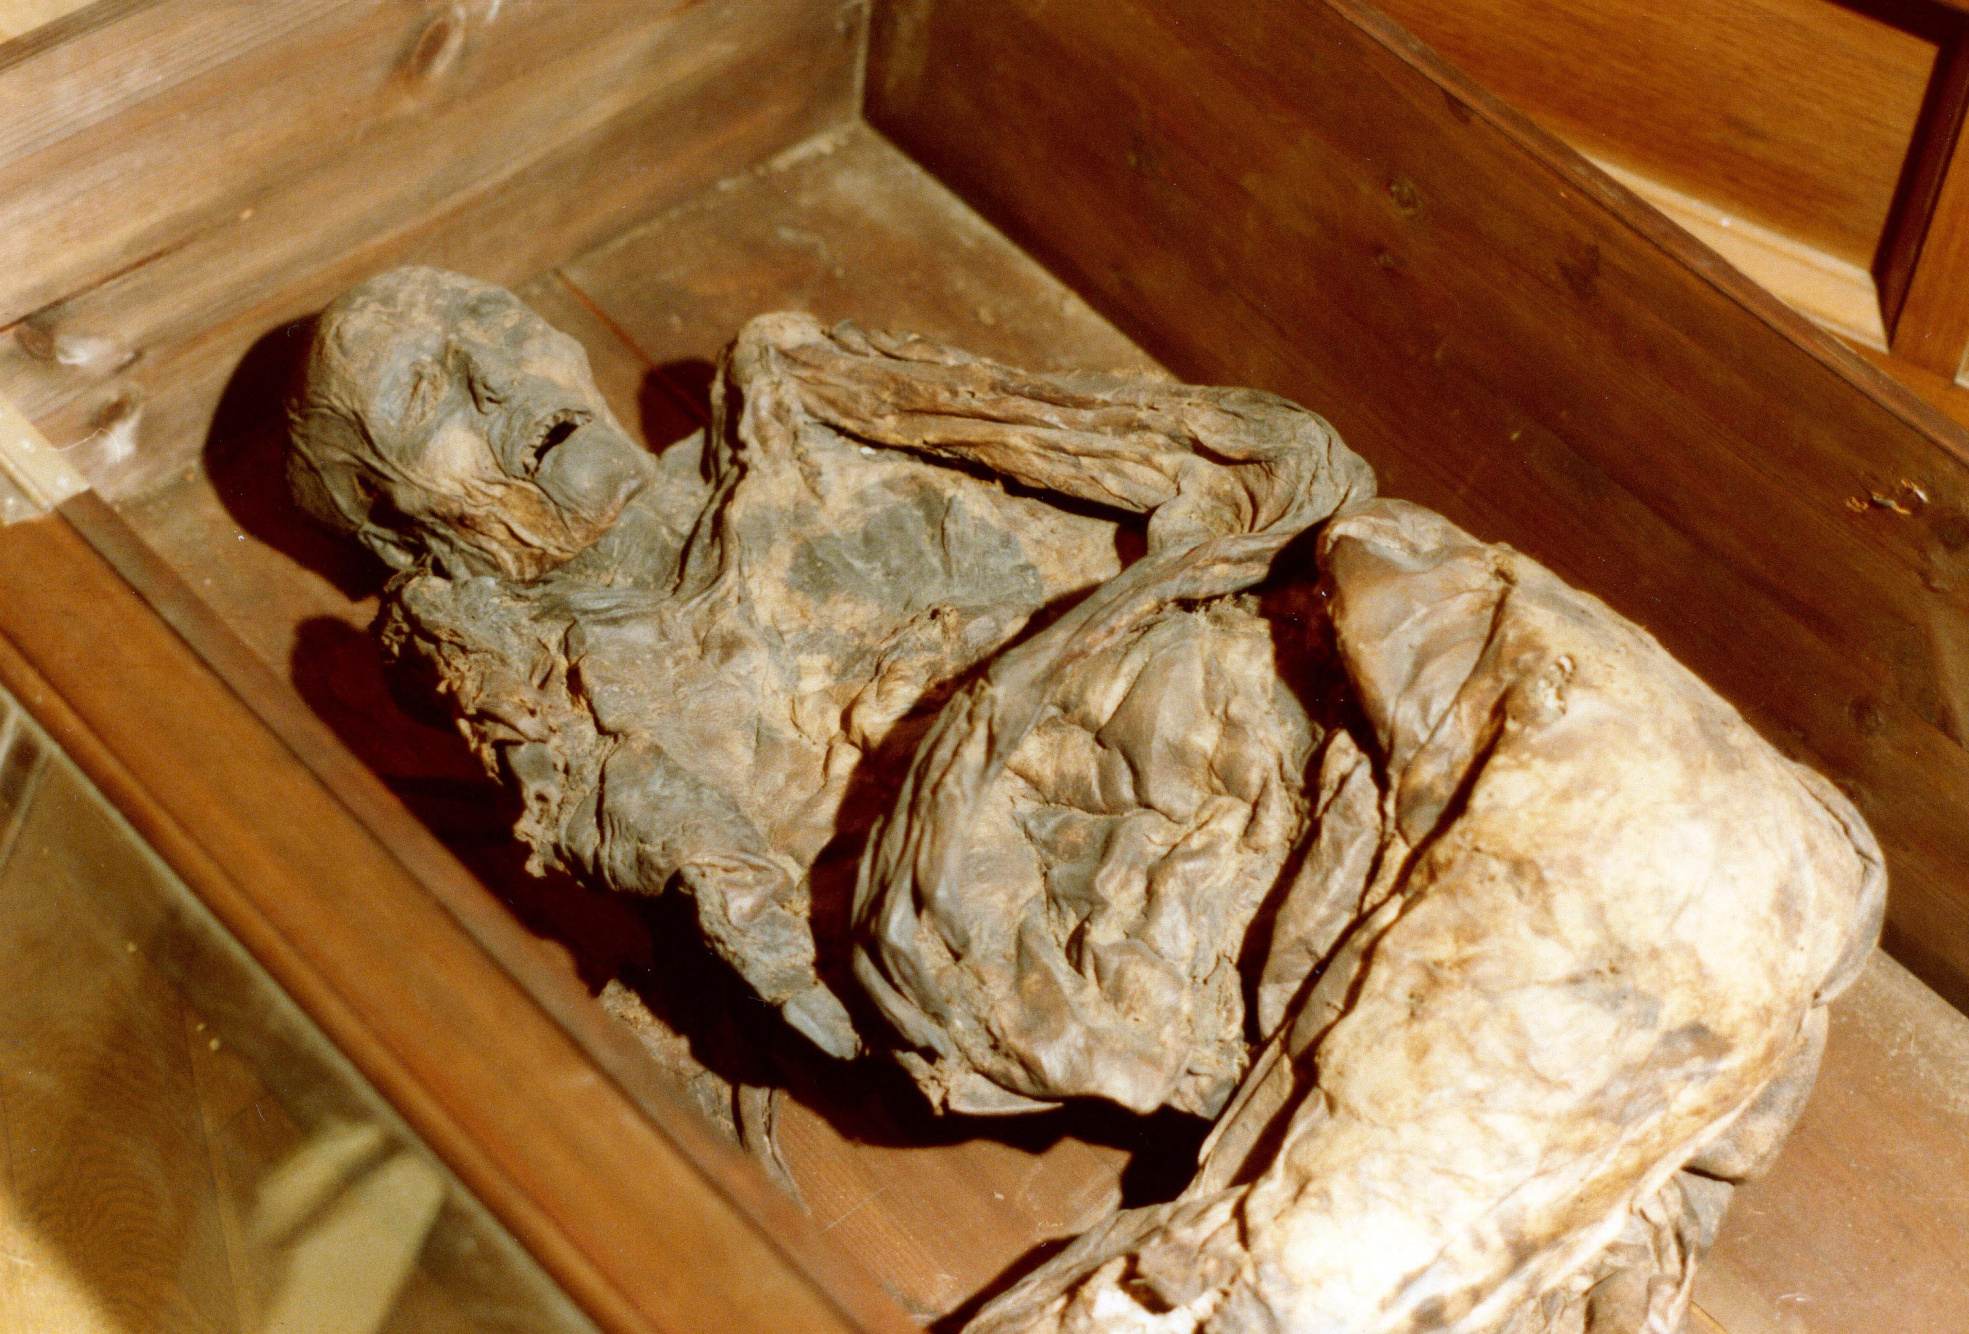 Bog body of the Huldremose woman